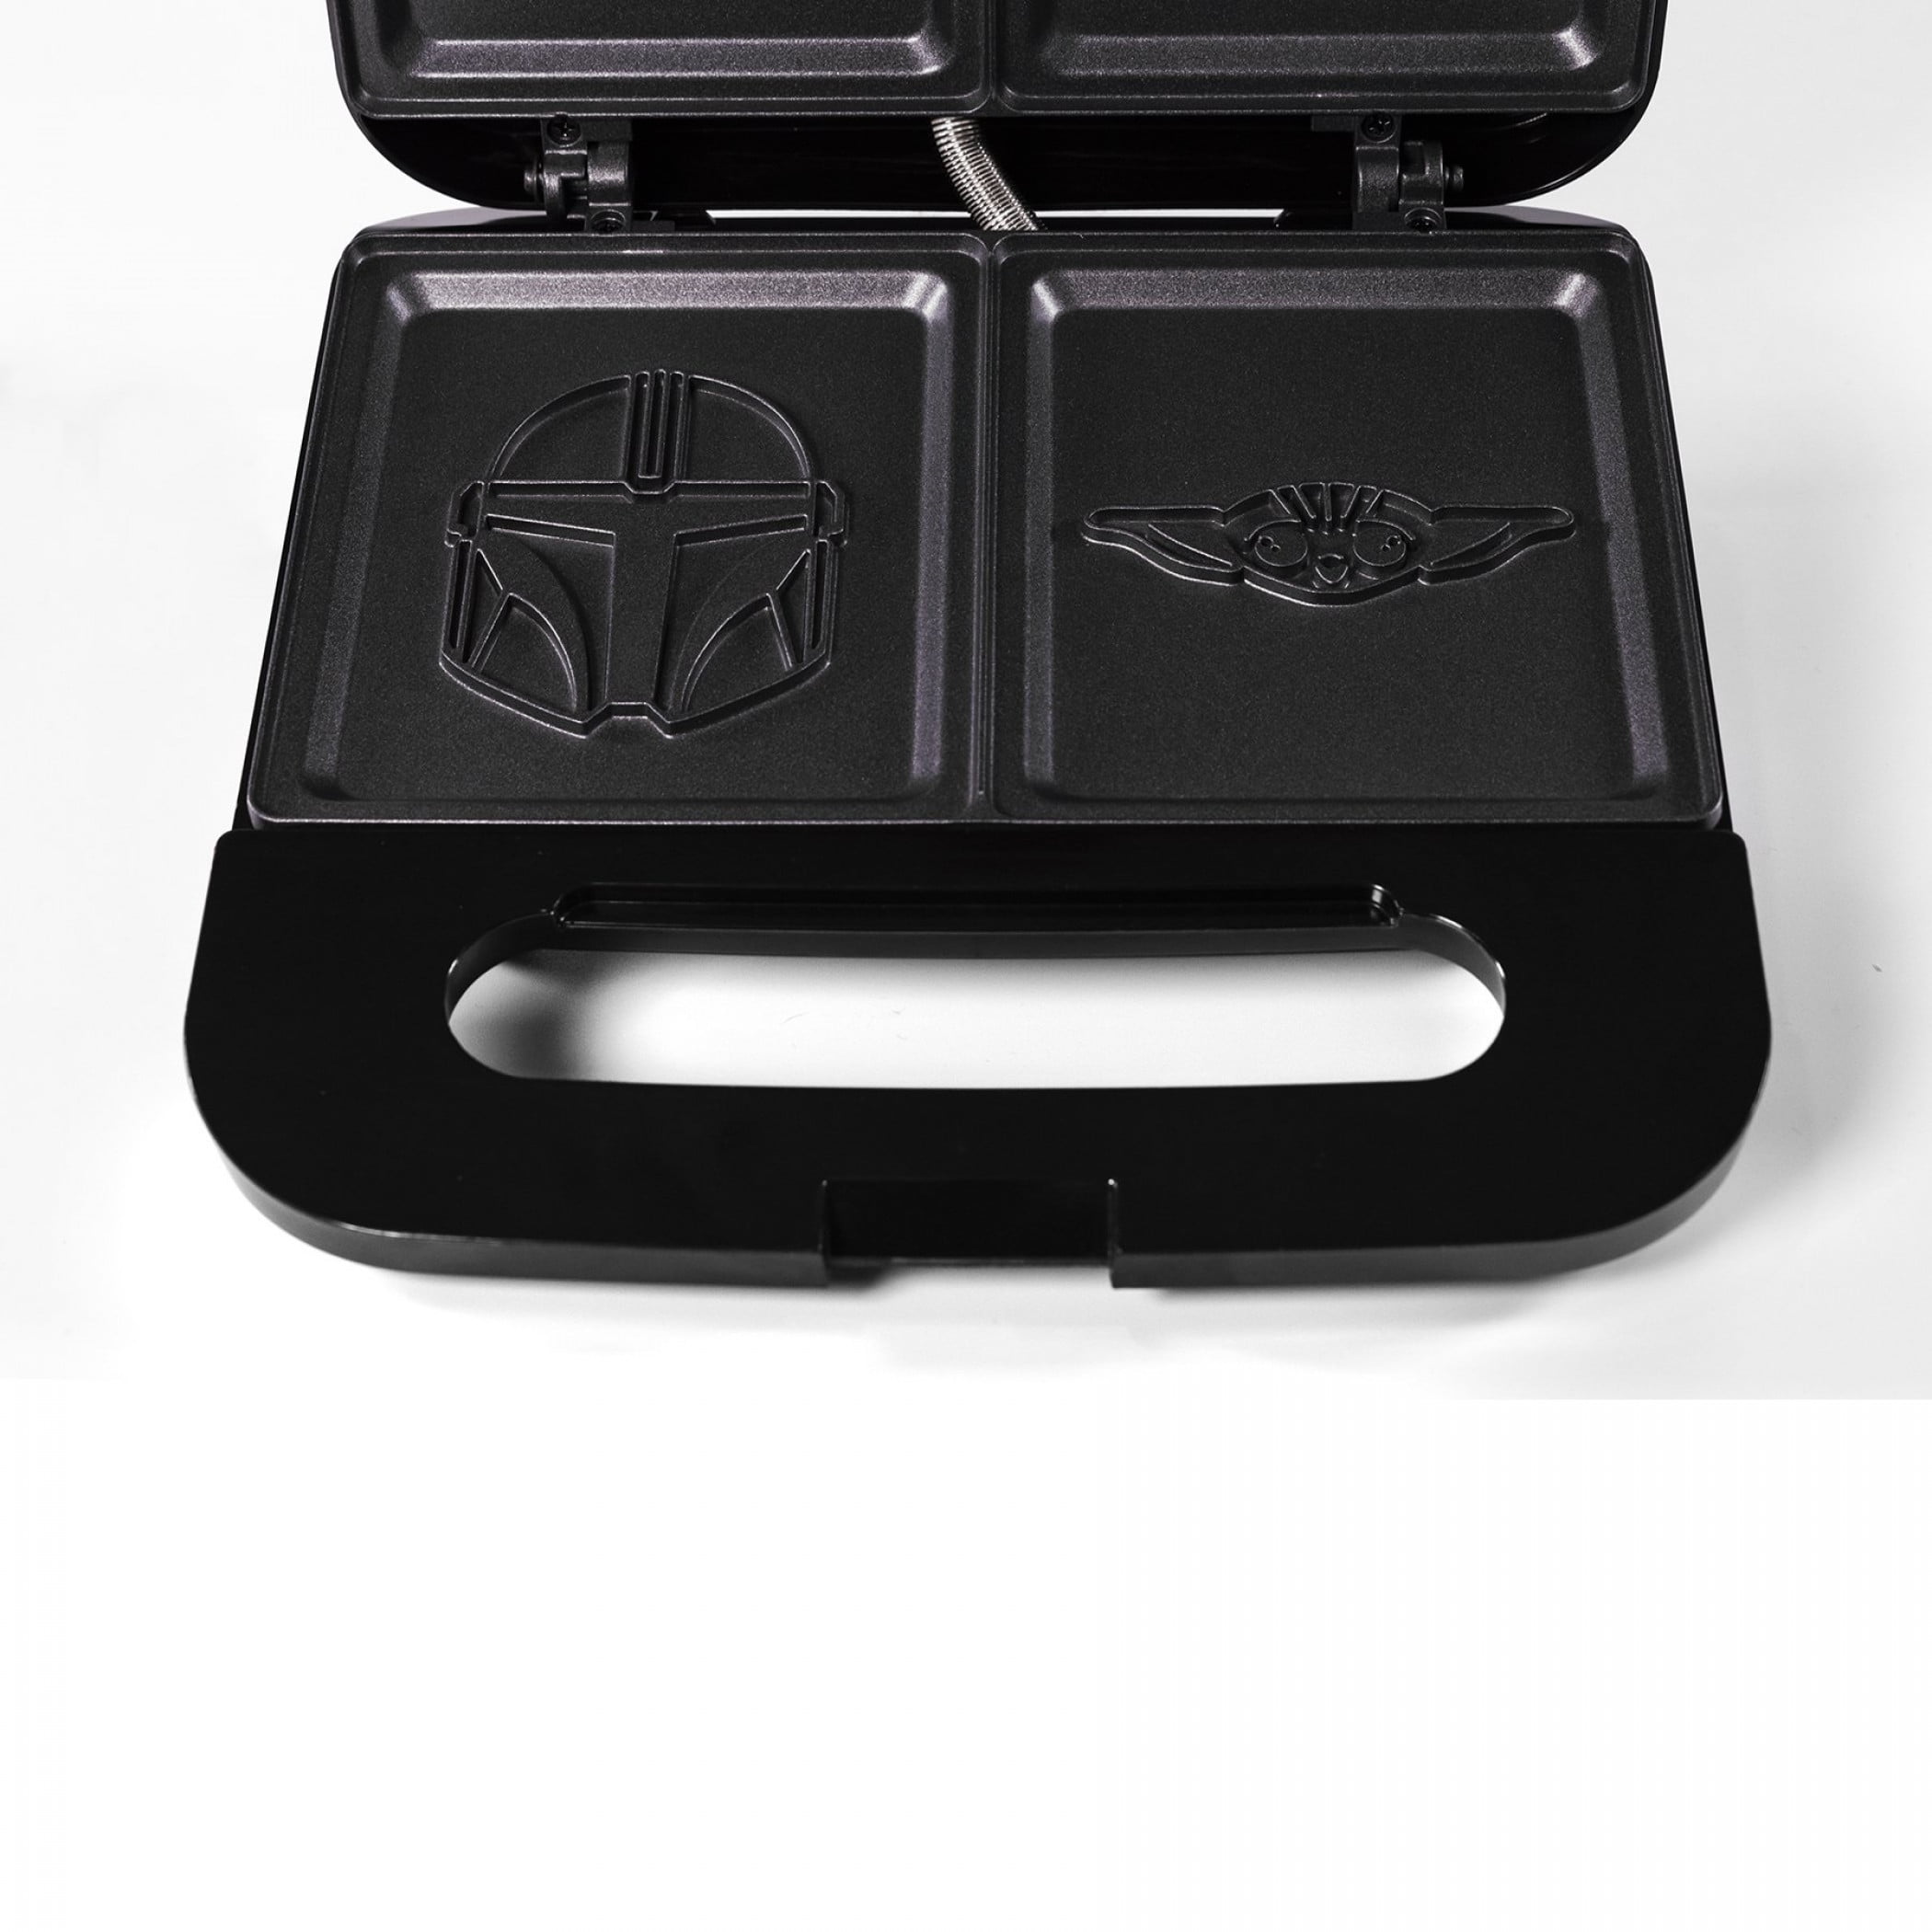 Uncanny Brands The Mandalorian Grilled Cheese Maker/Panini Press/Grill -  20235898